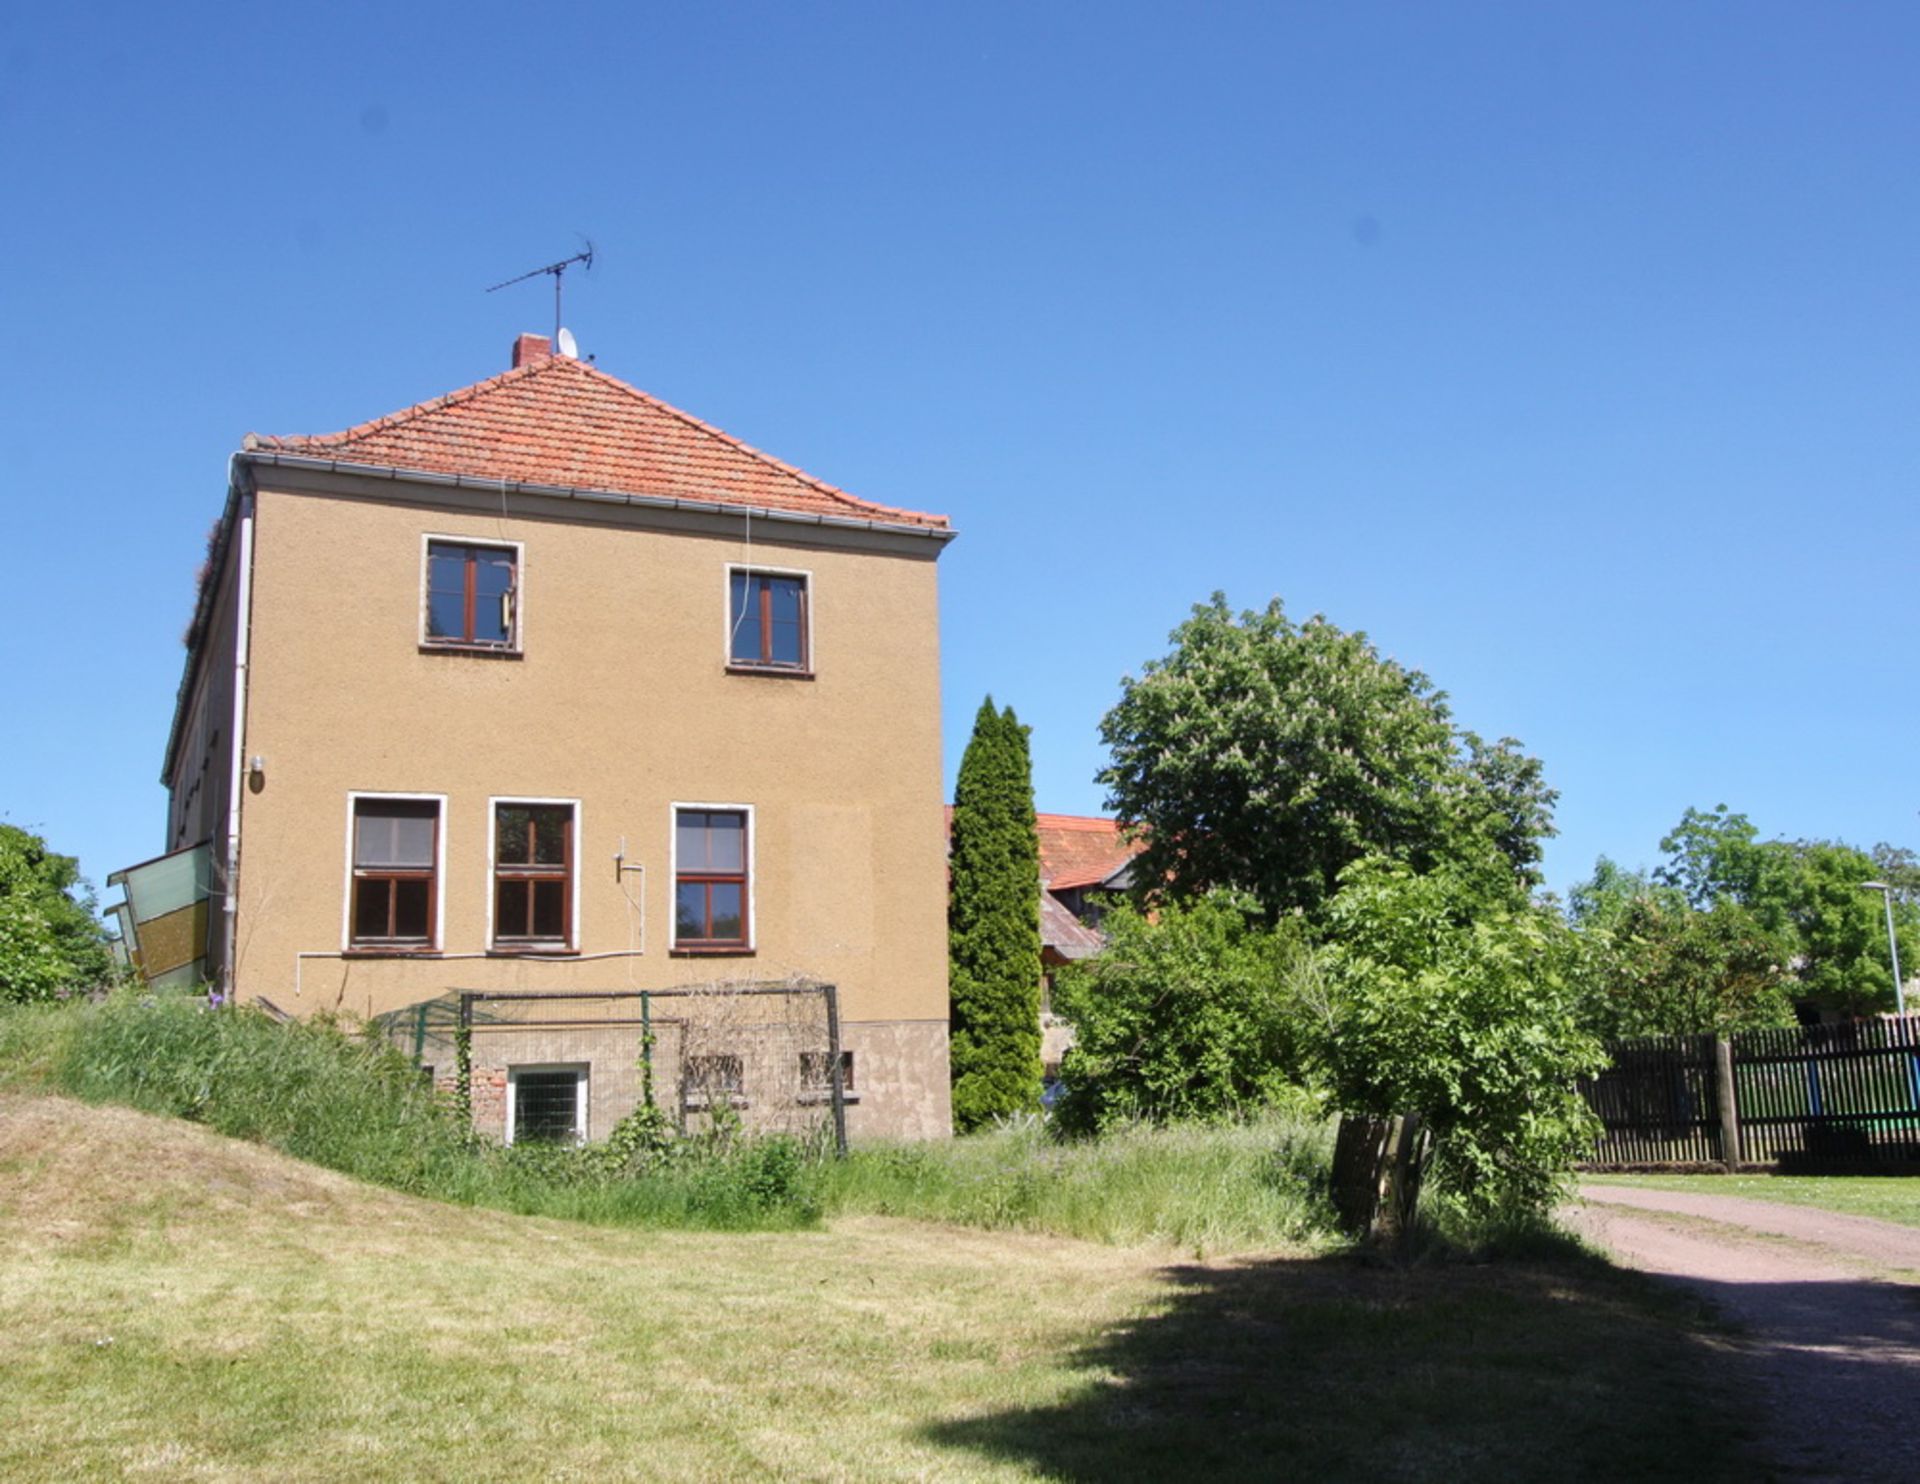 LARGE HOUSING BLOCK HORNSOMMEM, GERMANY READY TO MOVE INTO FREEHOLD VACANT POSSESSION - Image 35 of 91